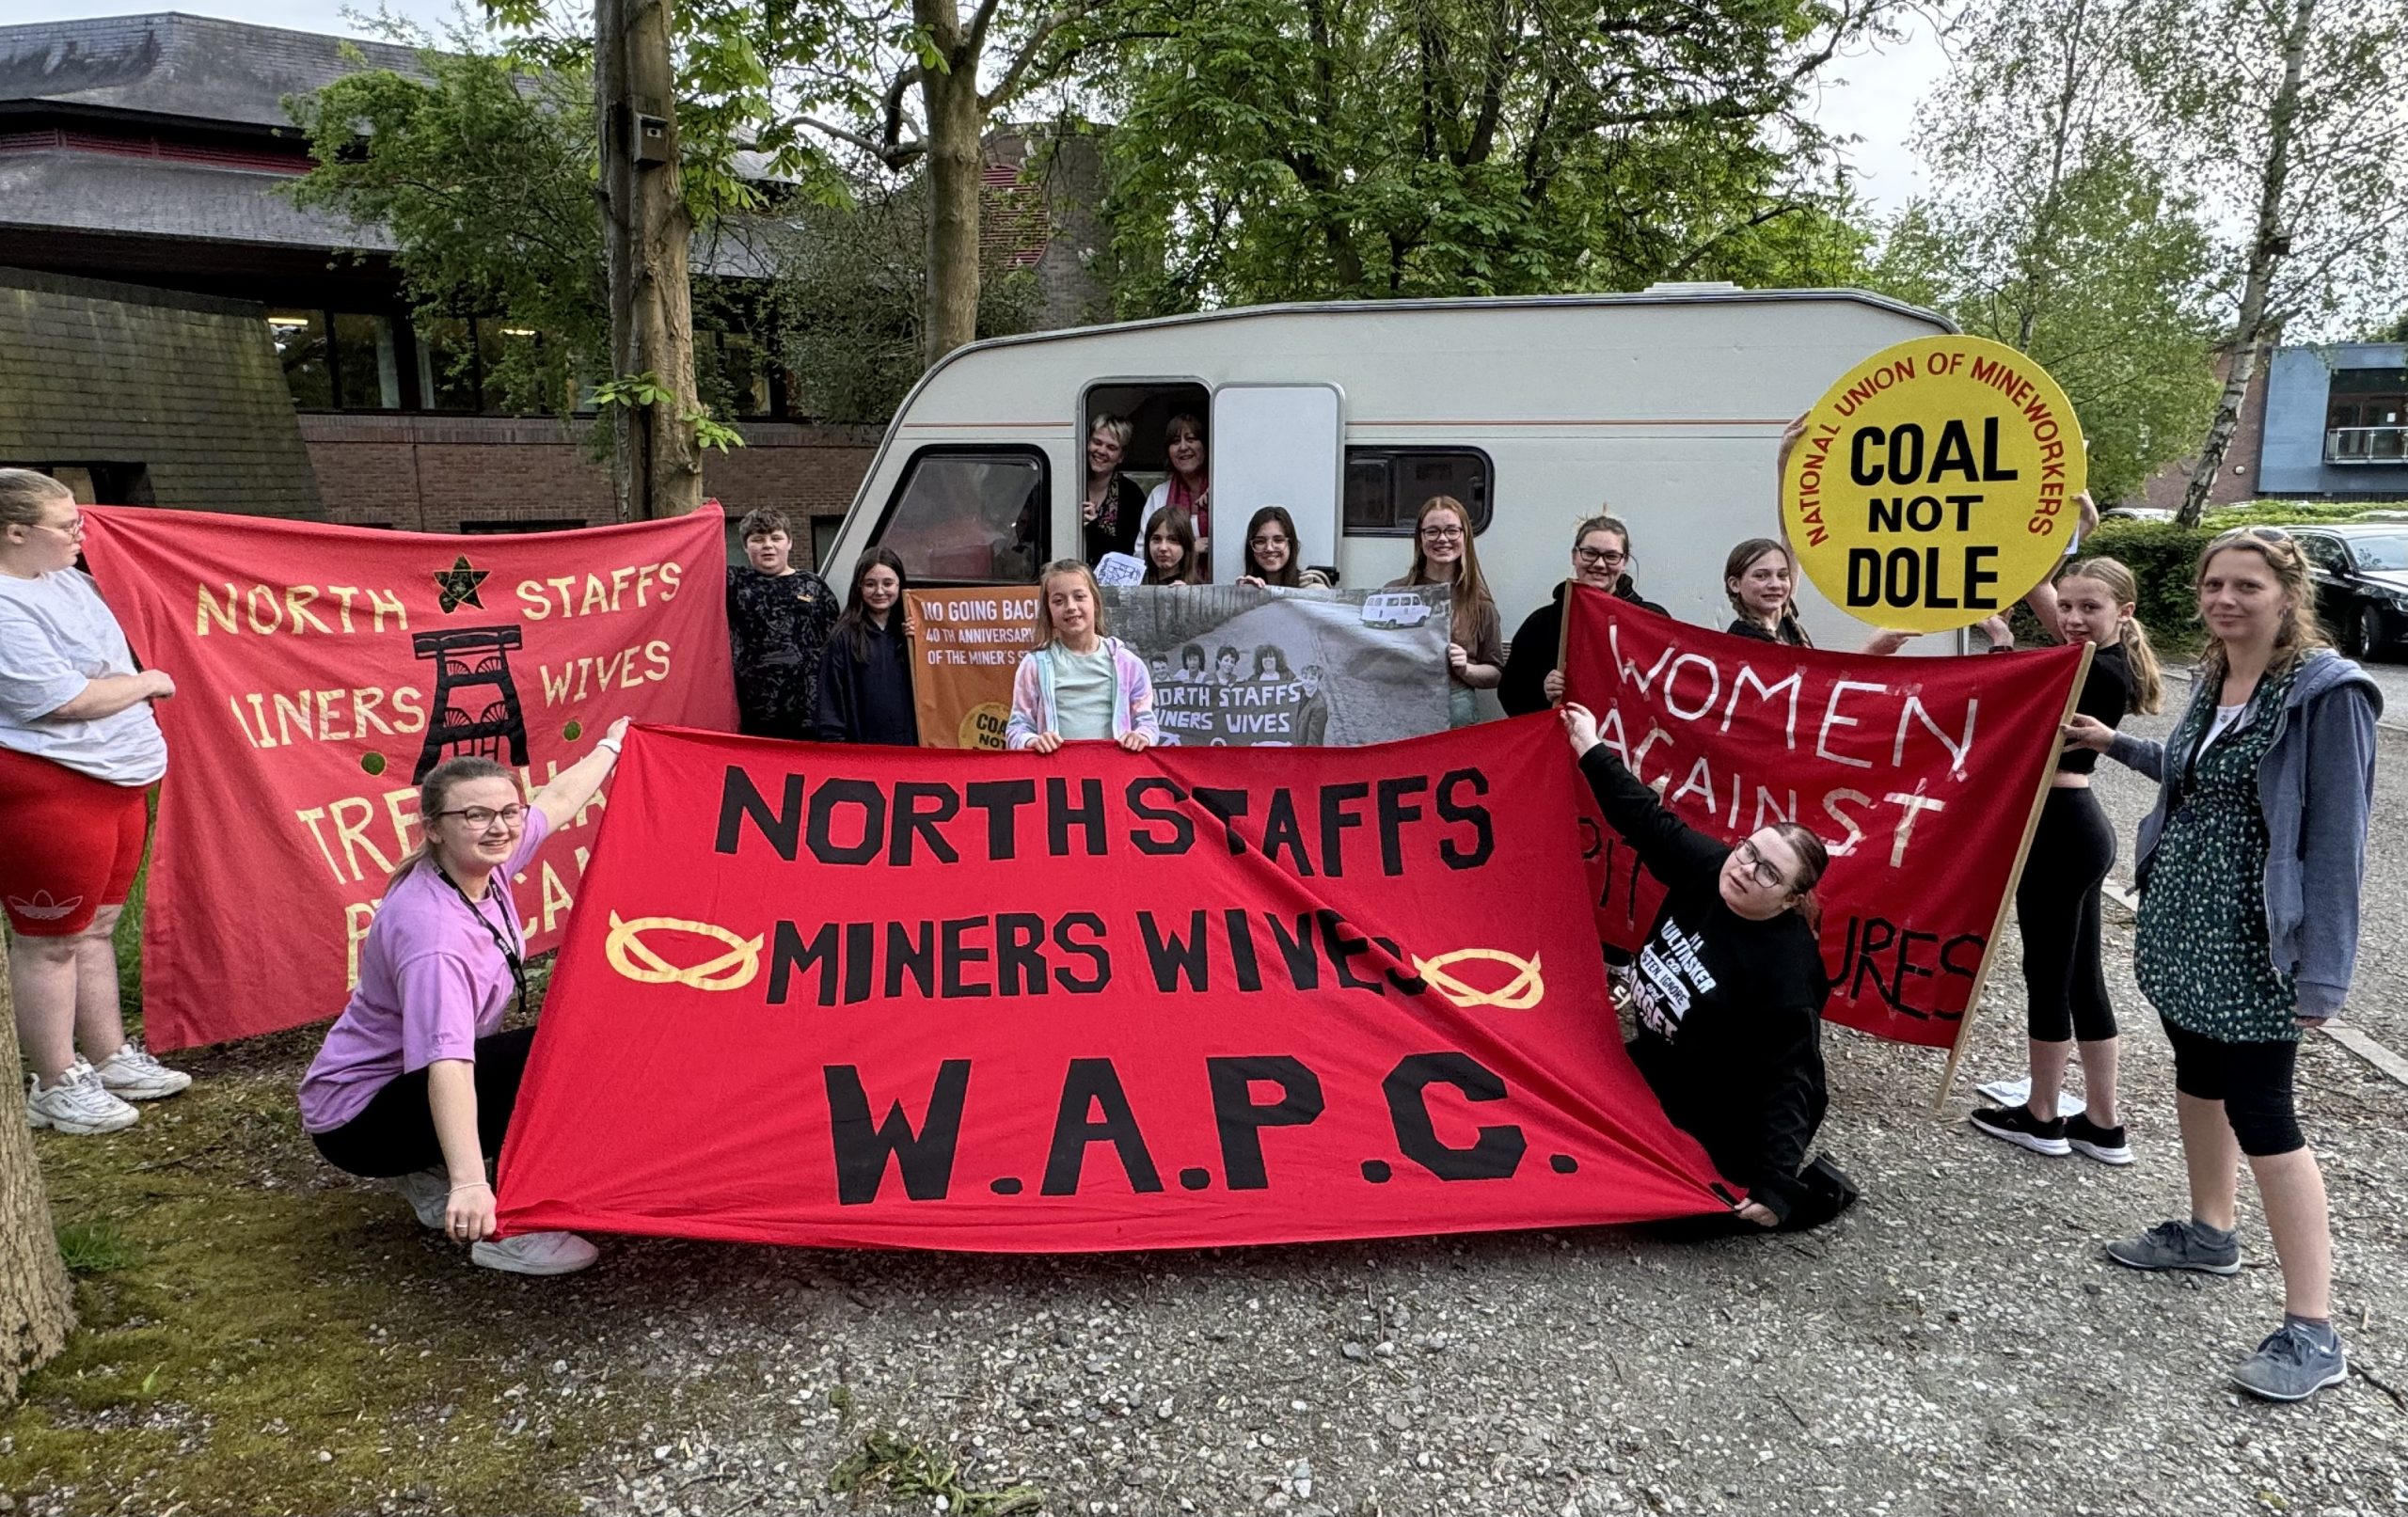 Members of New Vic Borderlines' Young People's Theatre Company with the 'Pit Camp Caravan', holding banners and signs with messages like 'North Staffs Miners Wives' and 'Coal not Dole'